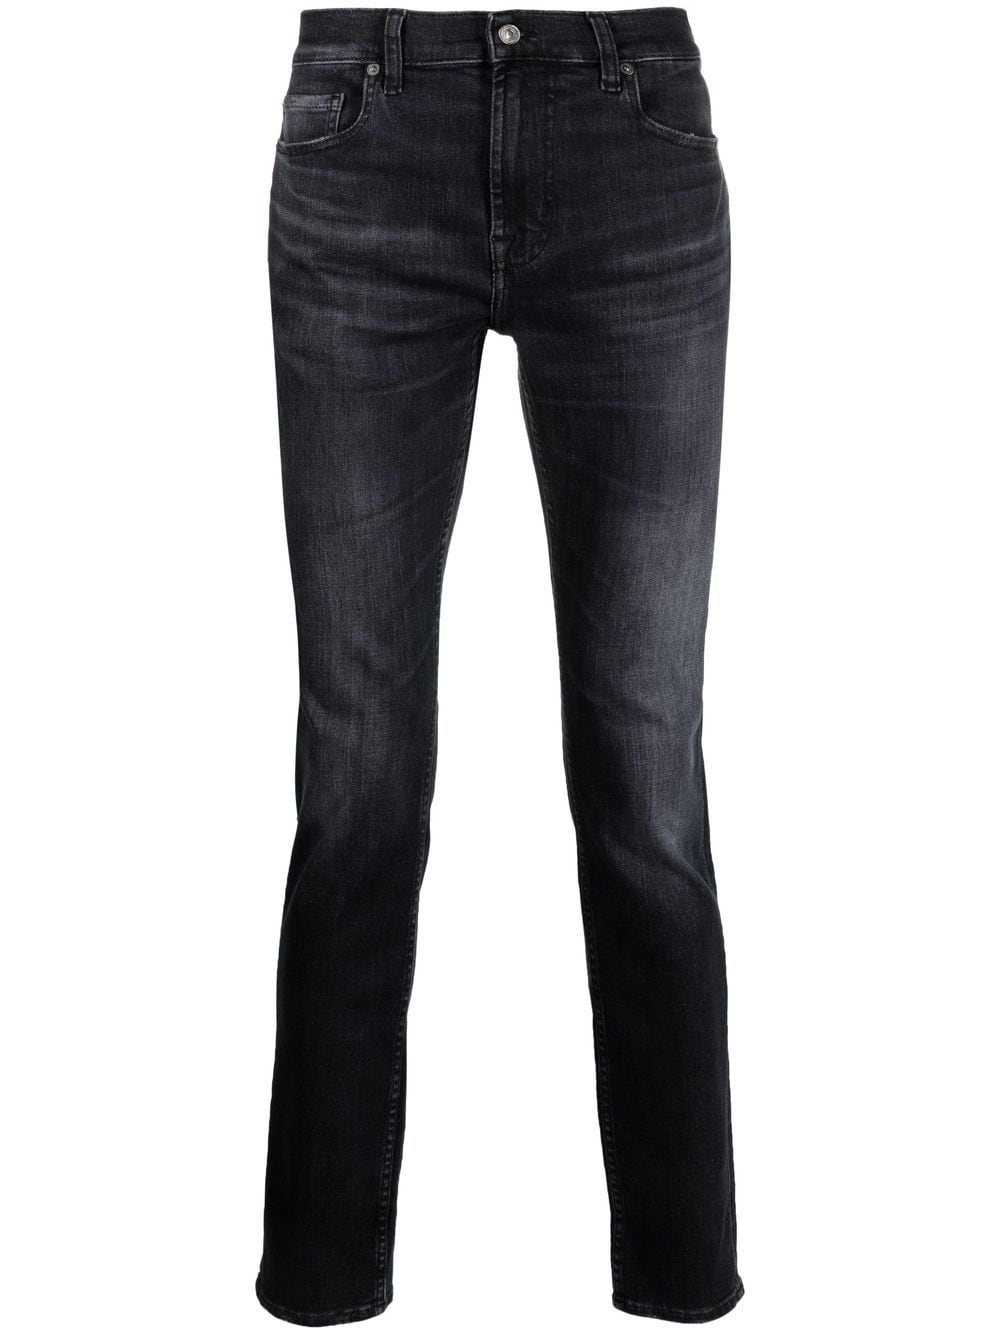 7 For All Mankind Paxytyn Jeans In Black